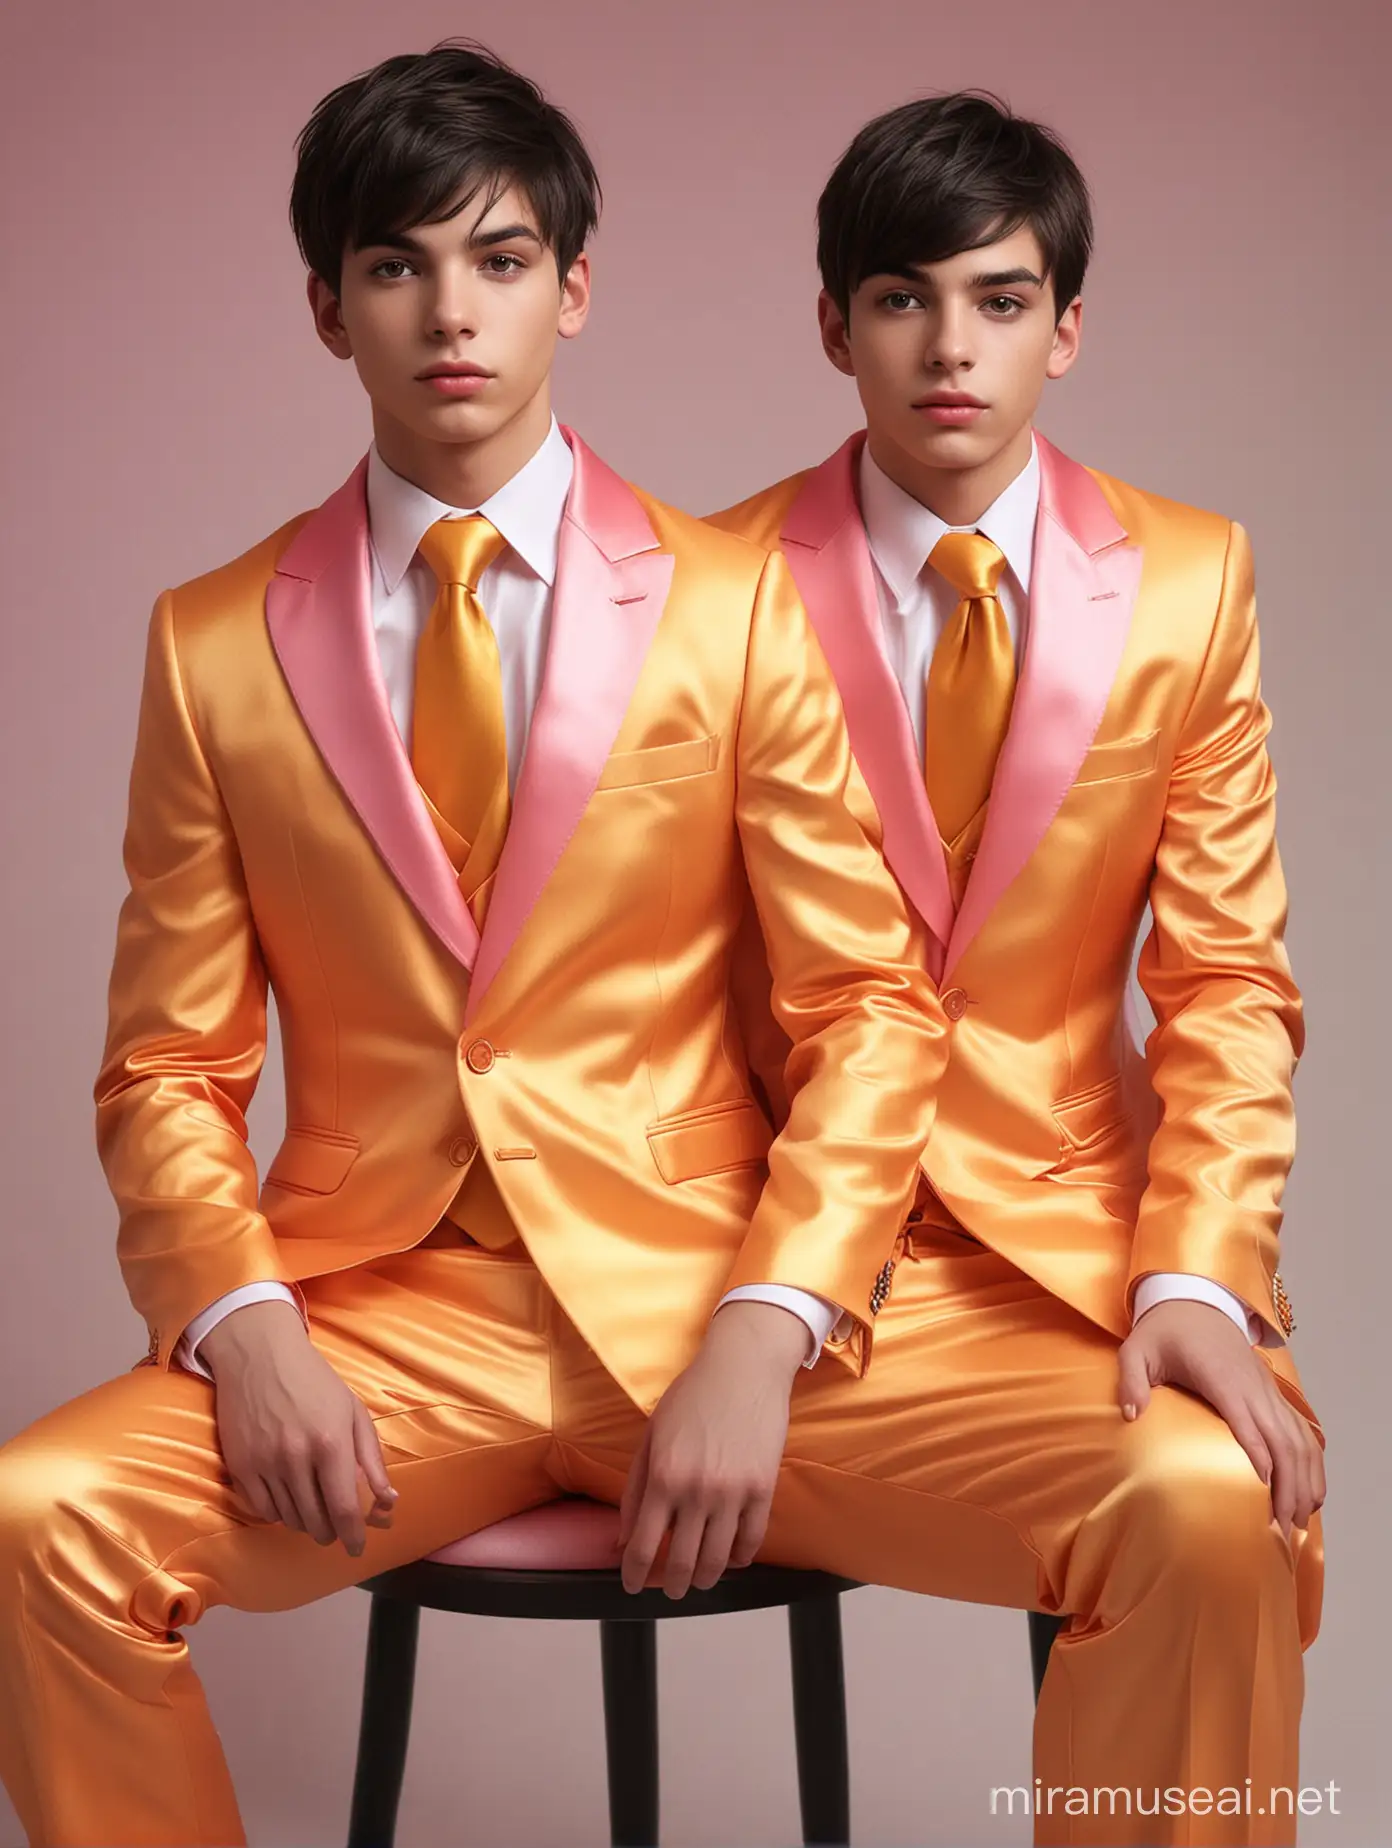 Two Stylish Twinks in Vibrant Satin Suits Sitting Closely